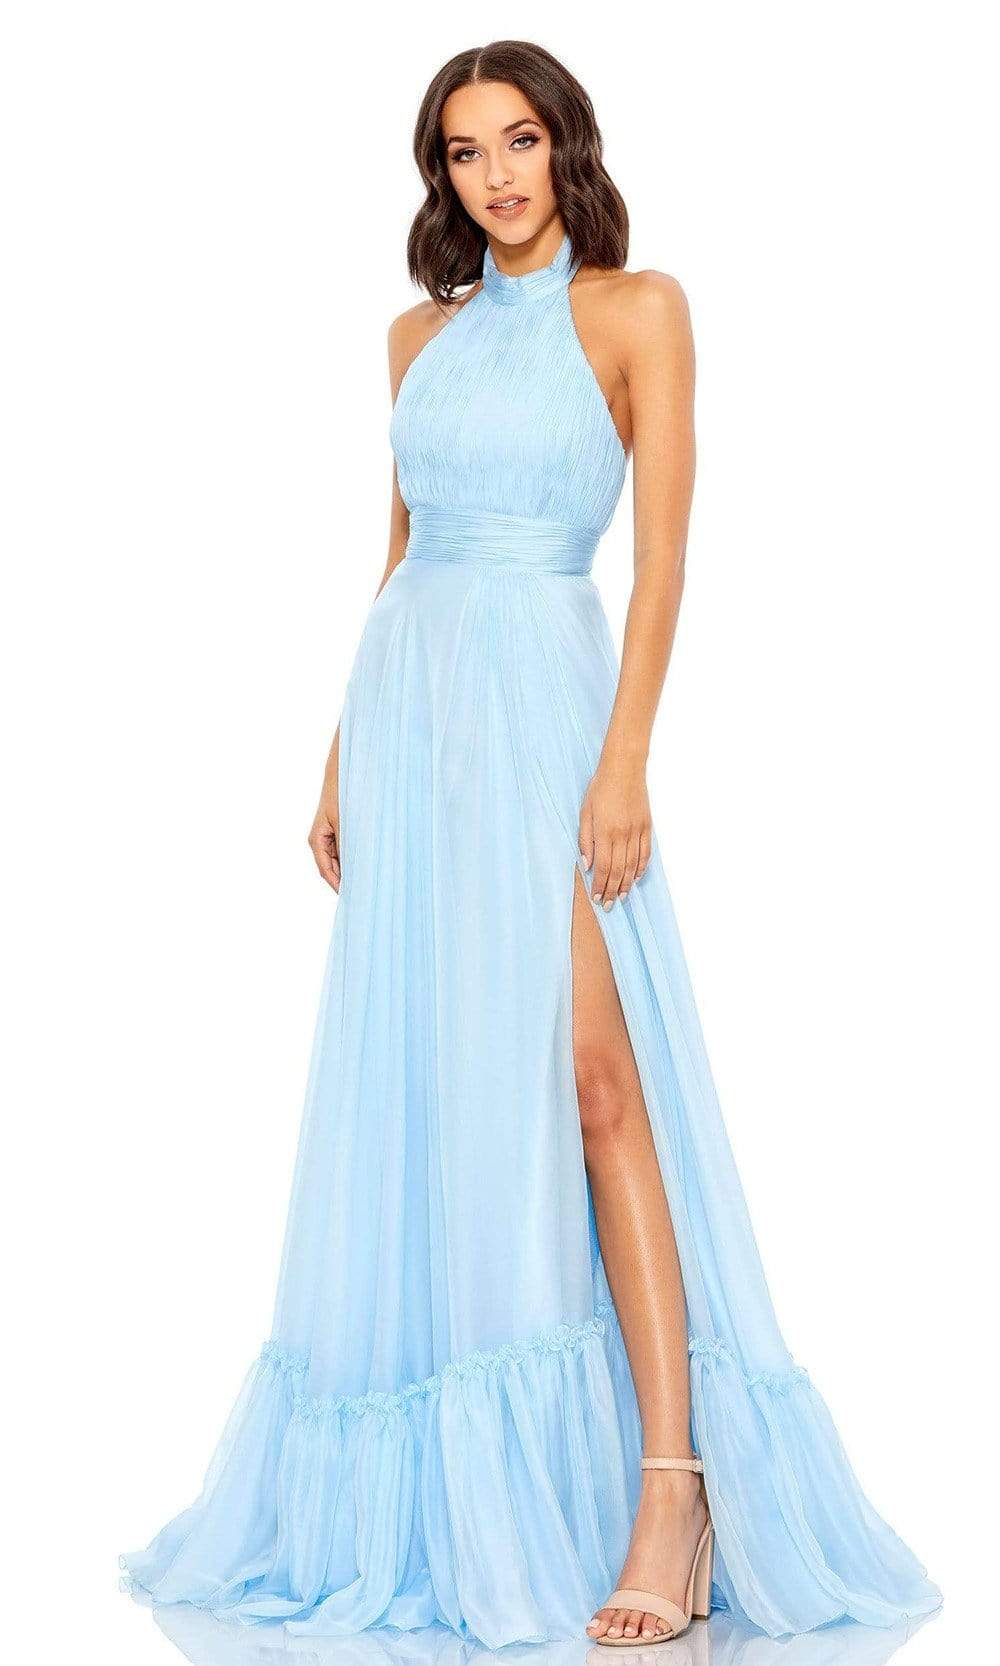 Strappy-Back Long Prom Dress with Empire Waist